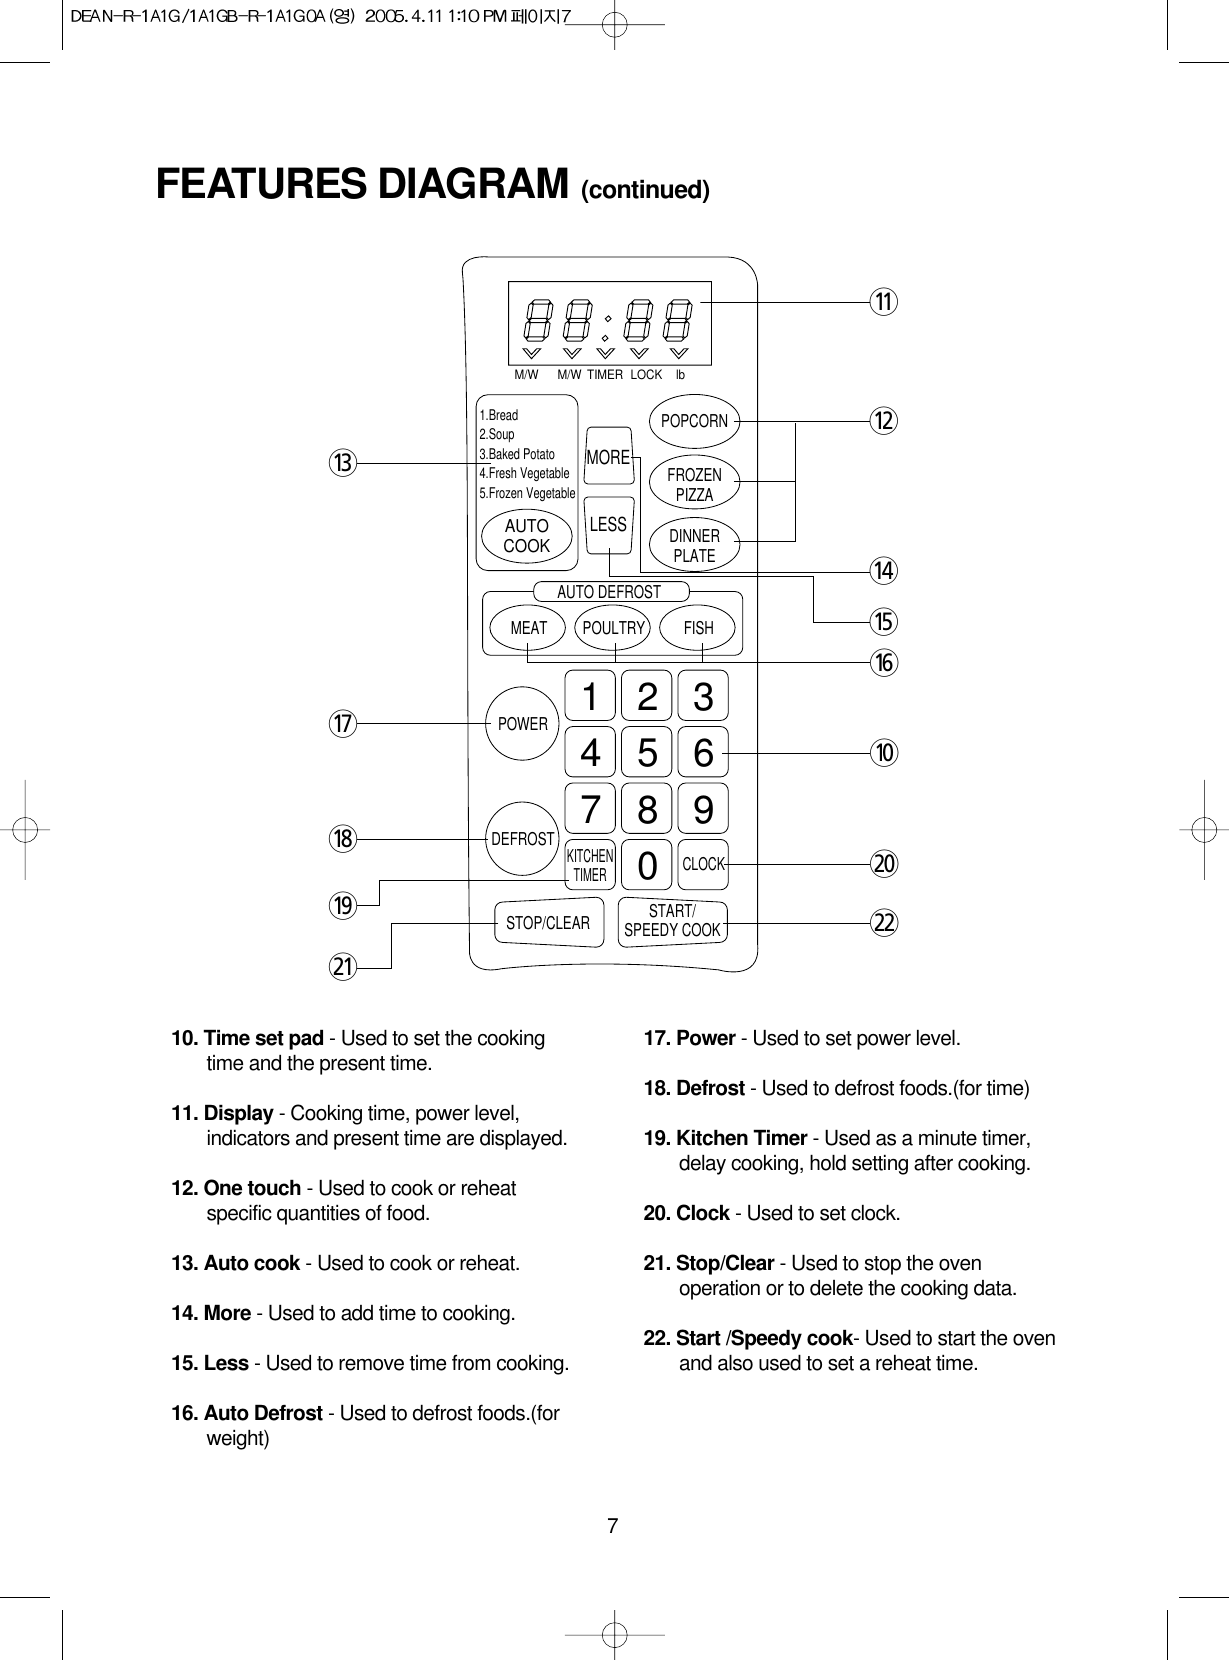 710. Time set pad - Used to set the cookingtime and the present time.11. Display - Cooking time, power level,indicators and present time are displayed.12. One touch - Used to cook or reheatspecific quantities of food. 13. Auto cook - Used to cook or reheat.14. More - Used to add time to cooking.15. Less - Used to remove time from cooking.16. Auto Defrost - Used to defrost foods.(forweight)17. Power - Used to set power level.18. Defrost - Used to defrost foods.(for time)19. Kitchen Timer - Used as a minute timer,delay cooking, hold setting after cooking.20. Clock - Used to set clock.21. Stop/Clear - Used to stop the ovenoperation or to delete the cooking data.22. Start /Speedy cook- Used to start the ovenand also used to set a reheat time.FEATURES DIAGRAM (continued)M/W M/W LOCK lbTIMERPOPCORNFROZENPIZZAAUTOCOOKDINNERPLATEMORELESSAUTO DEFROSTMEATPOWERPOULTRY FISHDEFROSTSTOP/CLEARCLOCKKITCHENTIMER1 2 34 5 67 8 90START/SPEEDY COOKqwuioaerty0ps1.Bread2.Soup3.Baked Potato4.Fresh Vegetable5.Frozen Vegetable